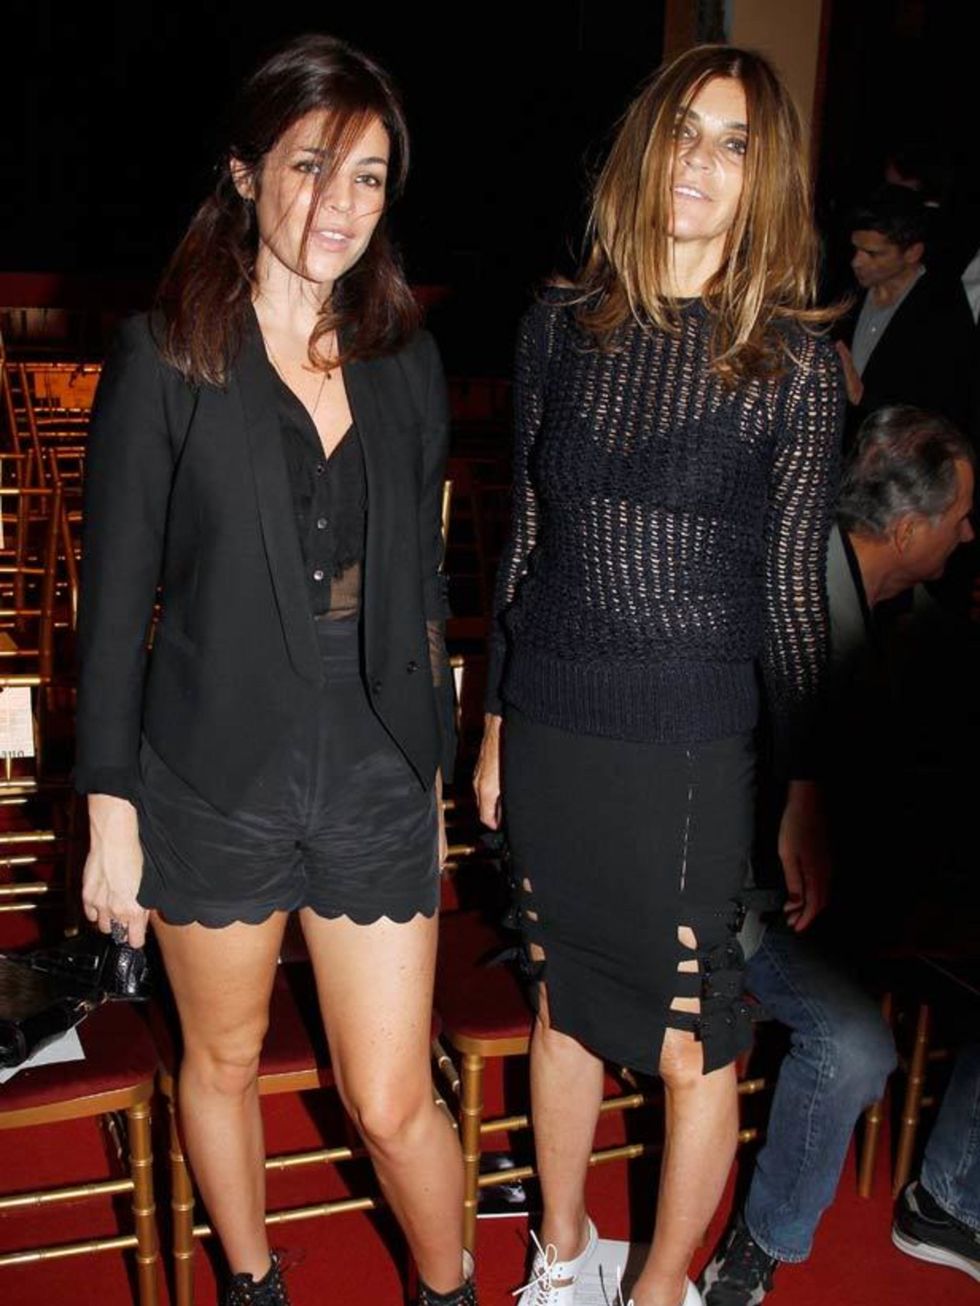 <p><a href="http://www.elleuk.com/starstyle/style-files/(section)/julia-restoin-roitfeld">Julia Restoin-Roitfeld</a> &amp; <a href="http://www.elleuk.com/content/search?SearchText=Carine+Roitfeld&amp;SearchButton=Search">Carine Roitfeld</a> attend the <a 